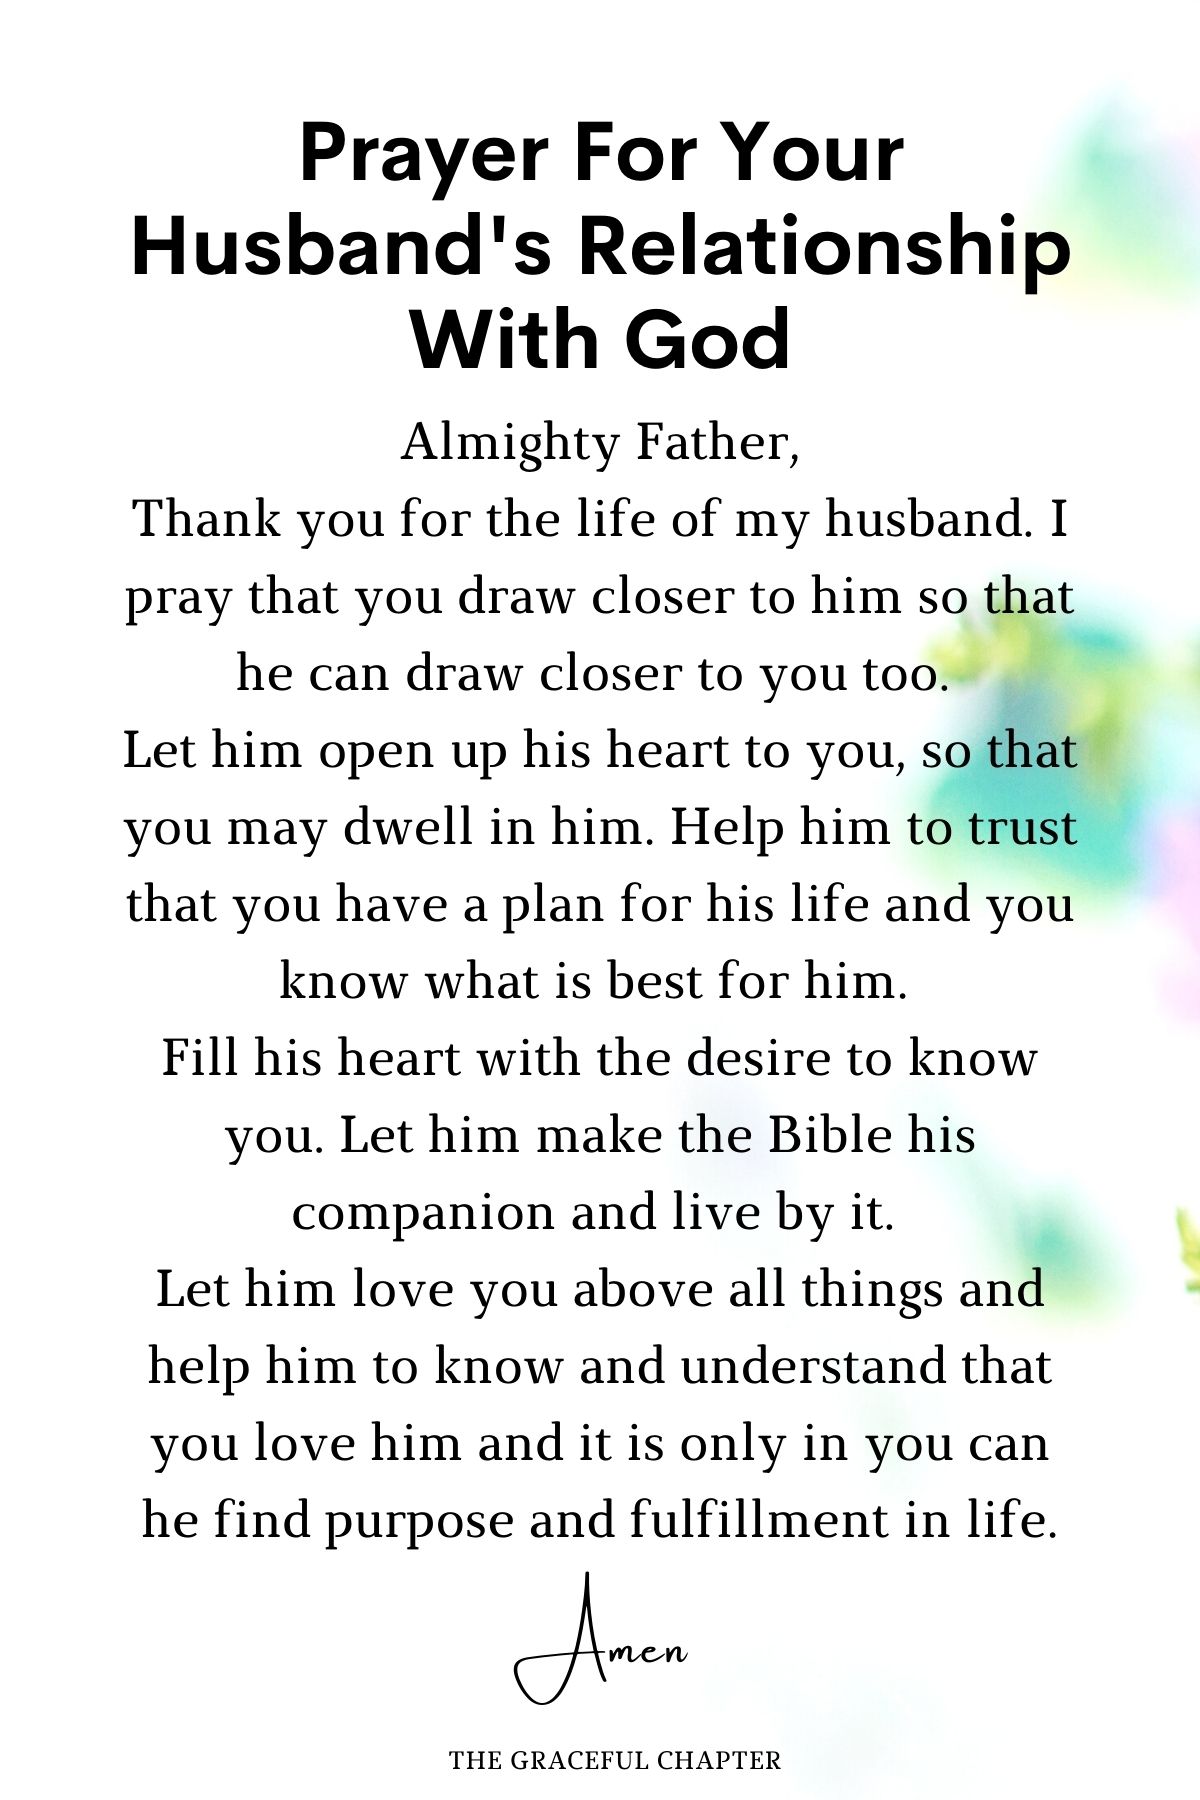 Prayer for your husband's relationship with God